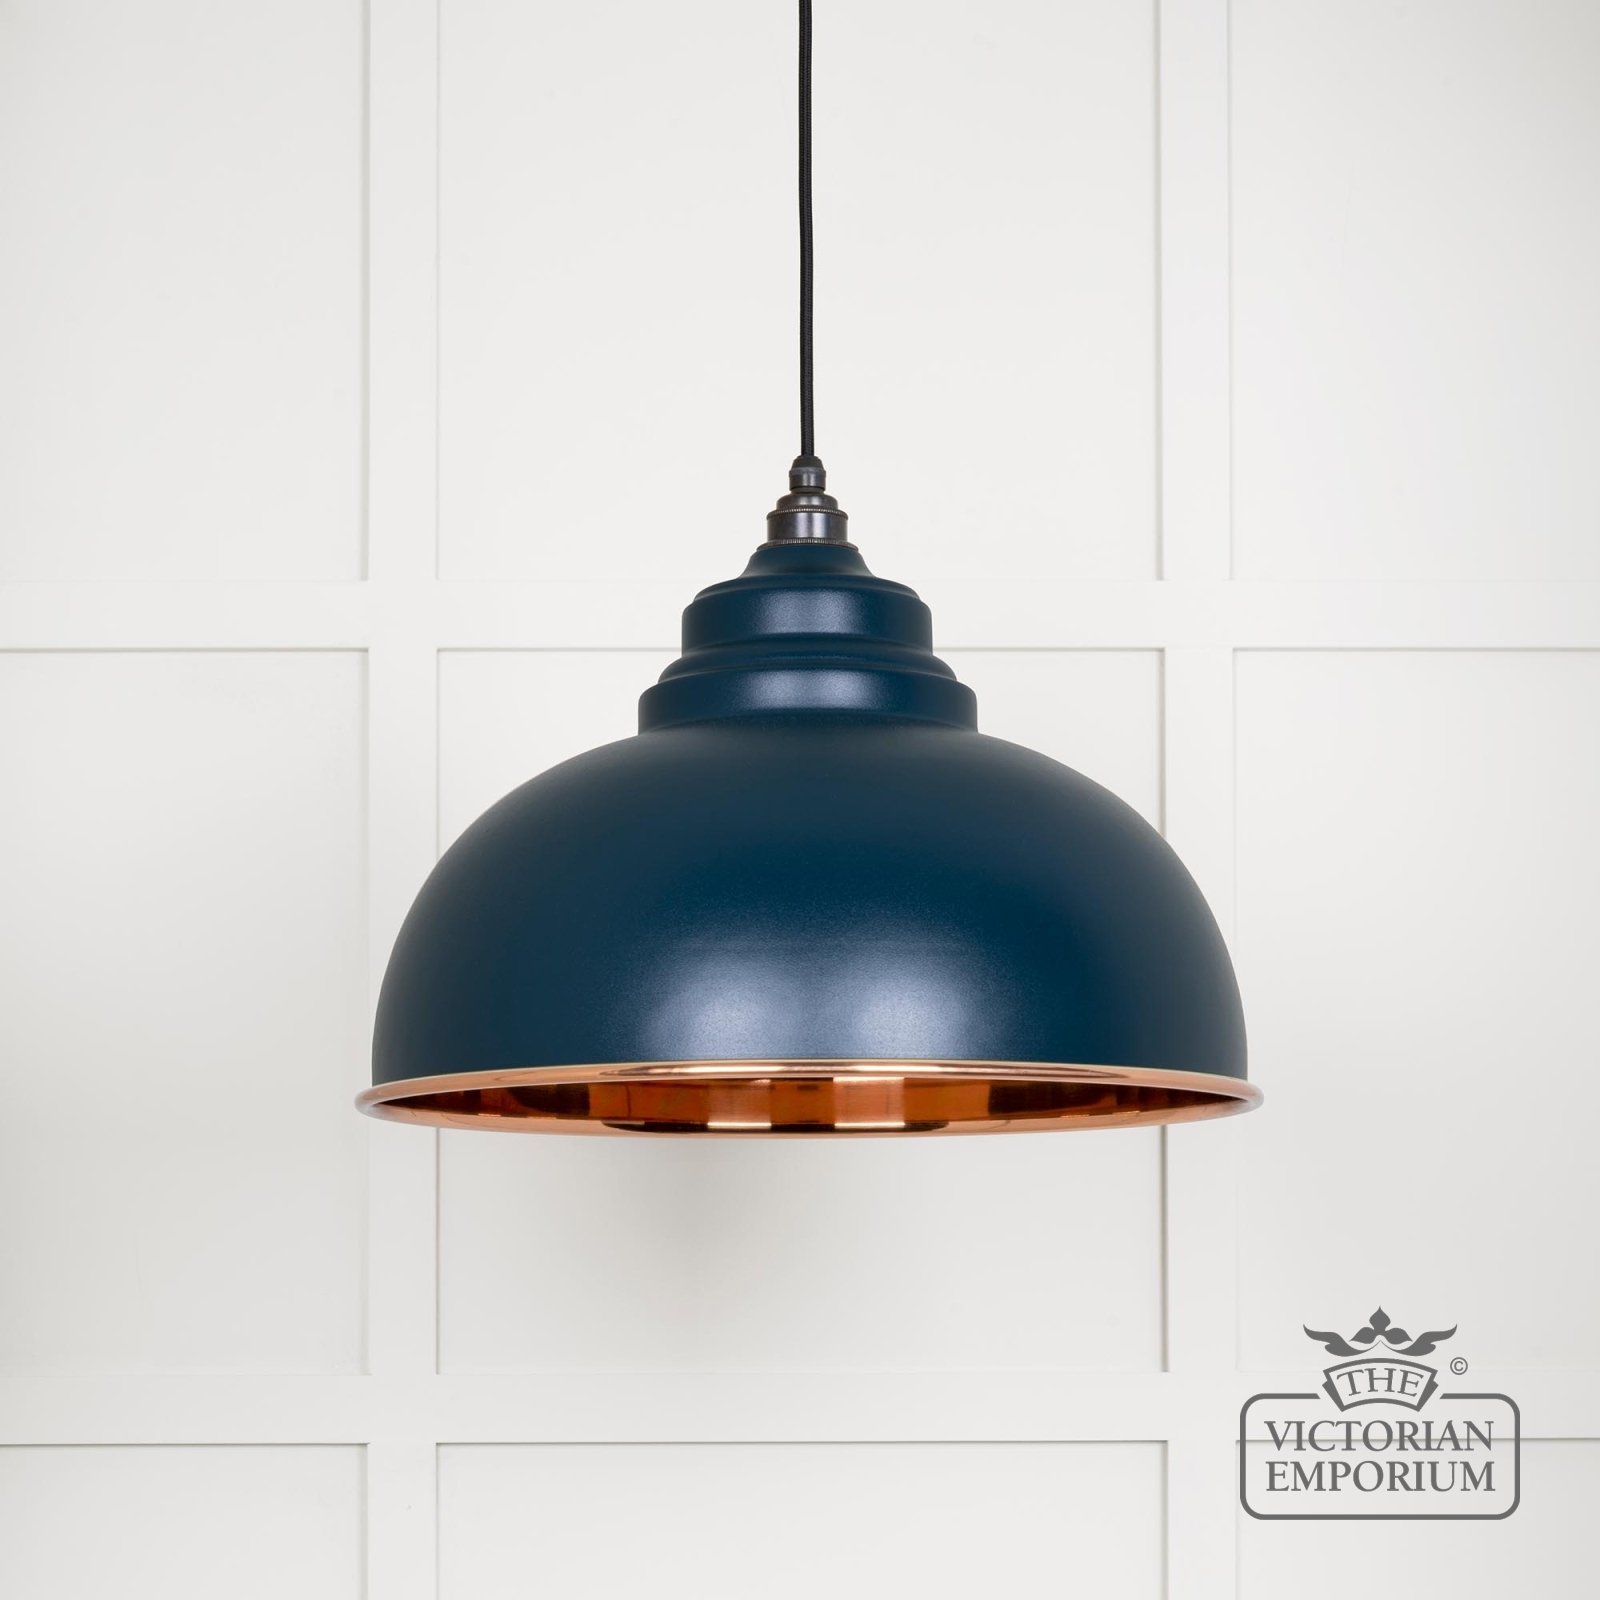 Harlow pendant light in smooth copper with Dusk exterior